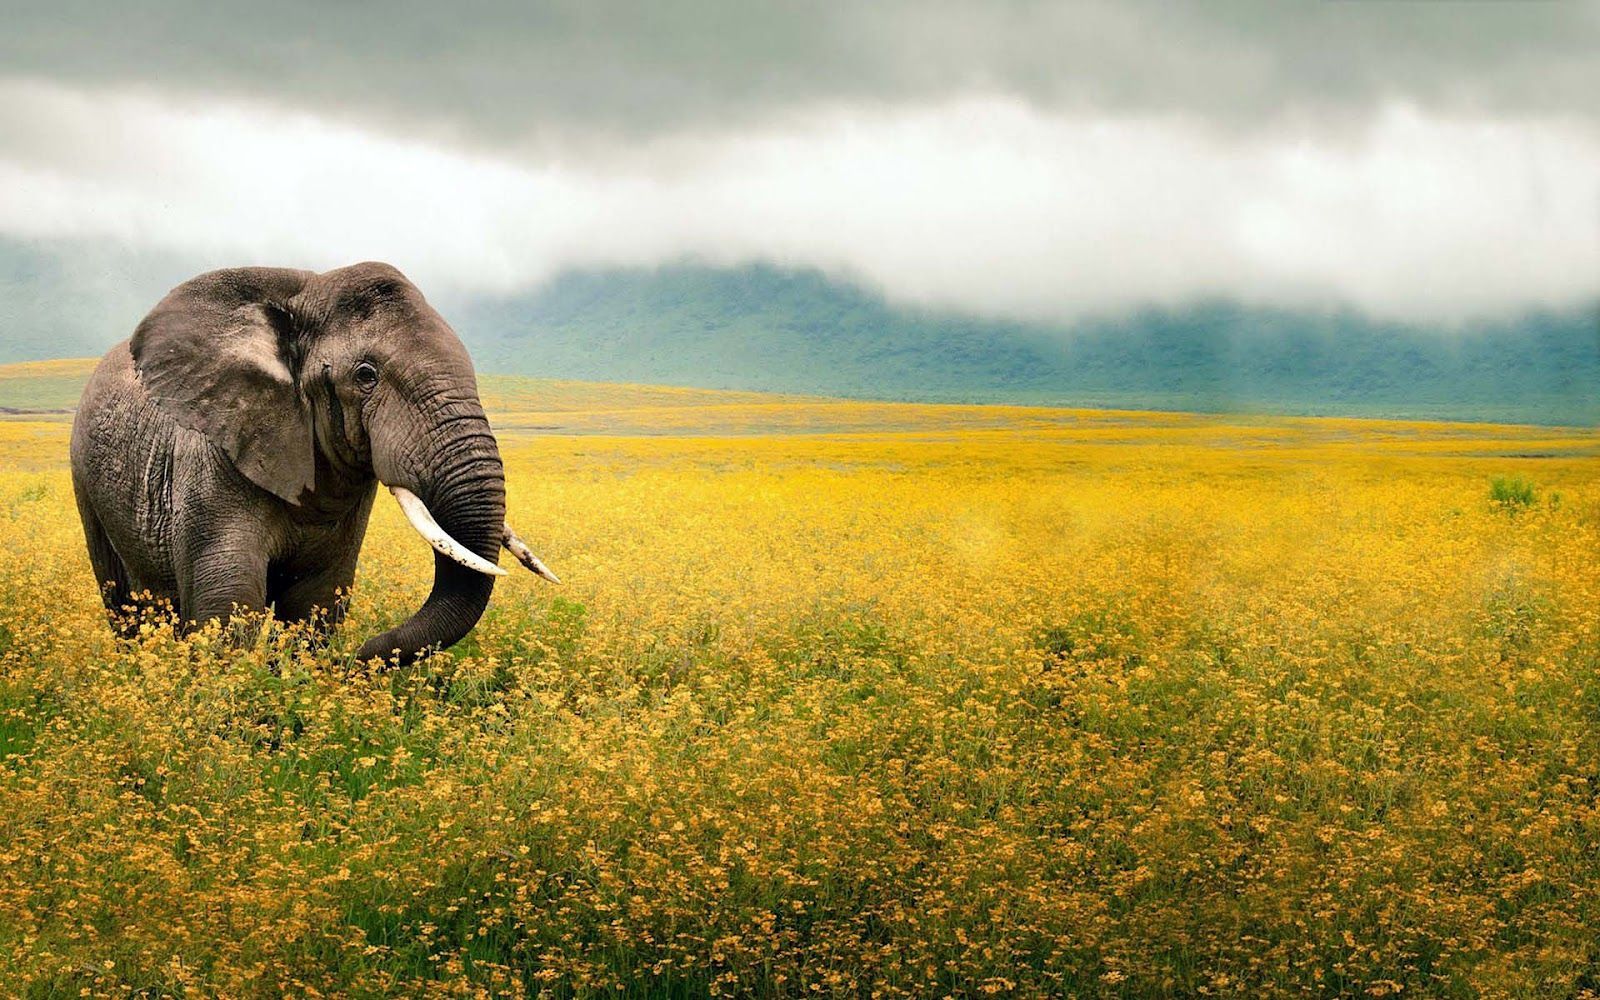 HD Elephants Wallpaper and Photo. HD Animals Wallpaper. Elephant wallpaper, Animal wallpaper, Elephant picture